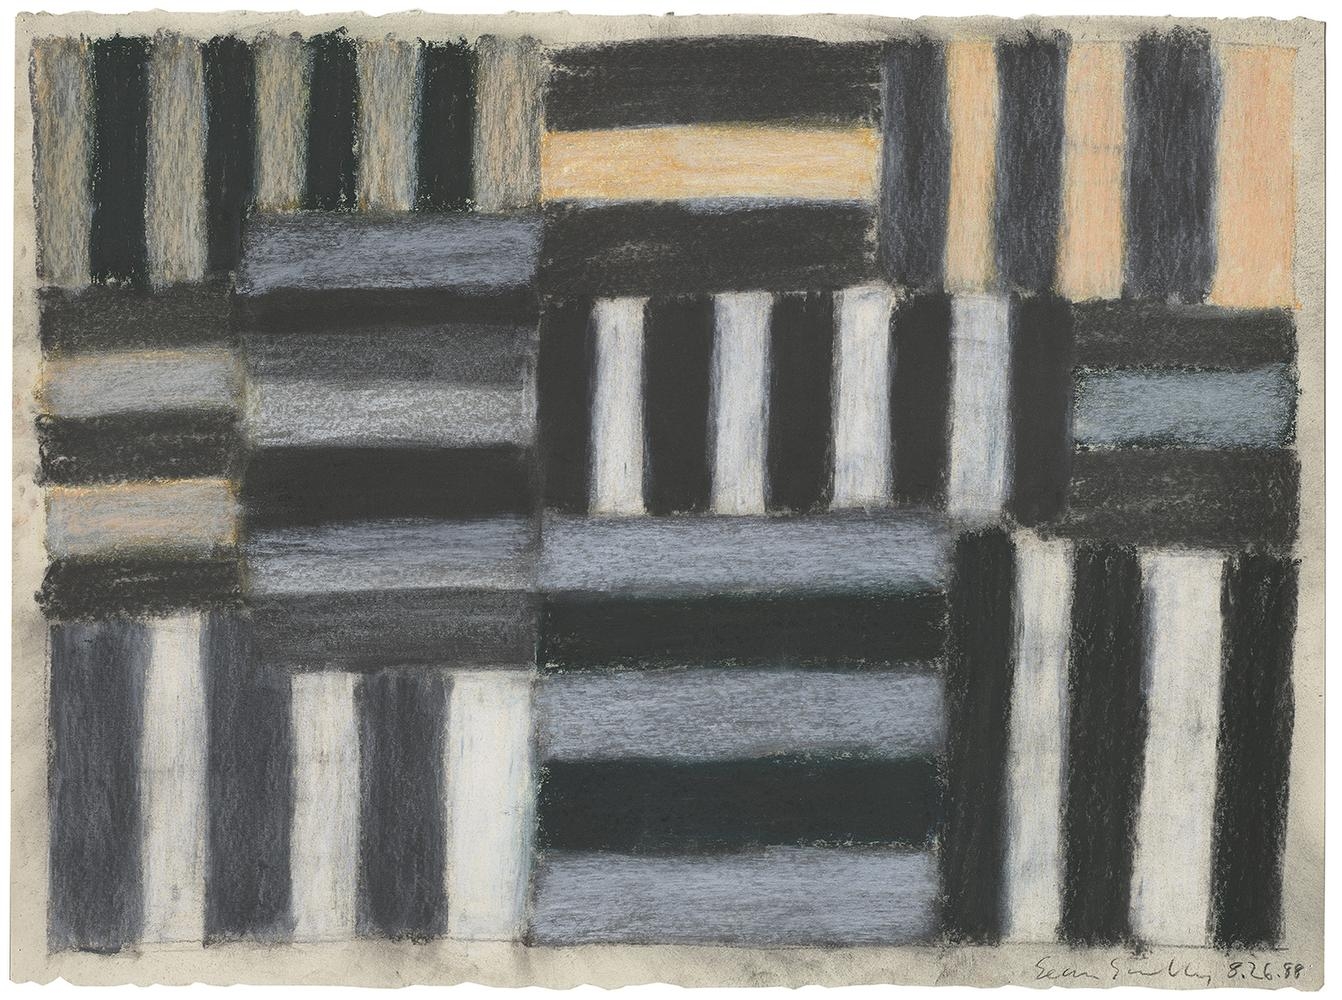 Sean Scully
8.26.88
1988
pastel on paper
22 1/4 x 30 inches (56.5 x 76.2 cm)